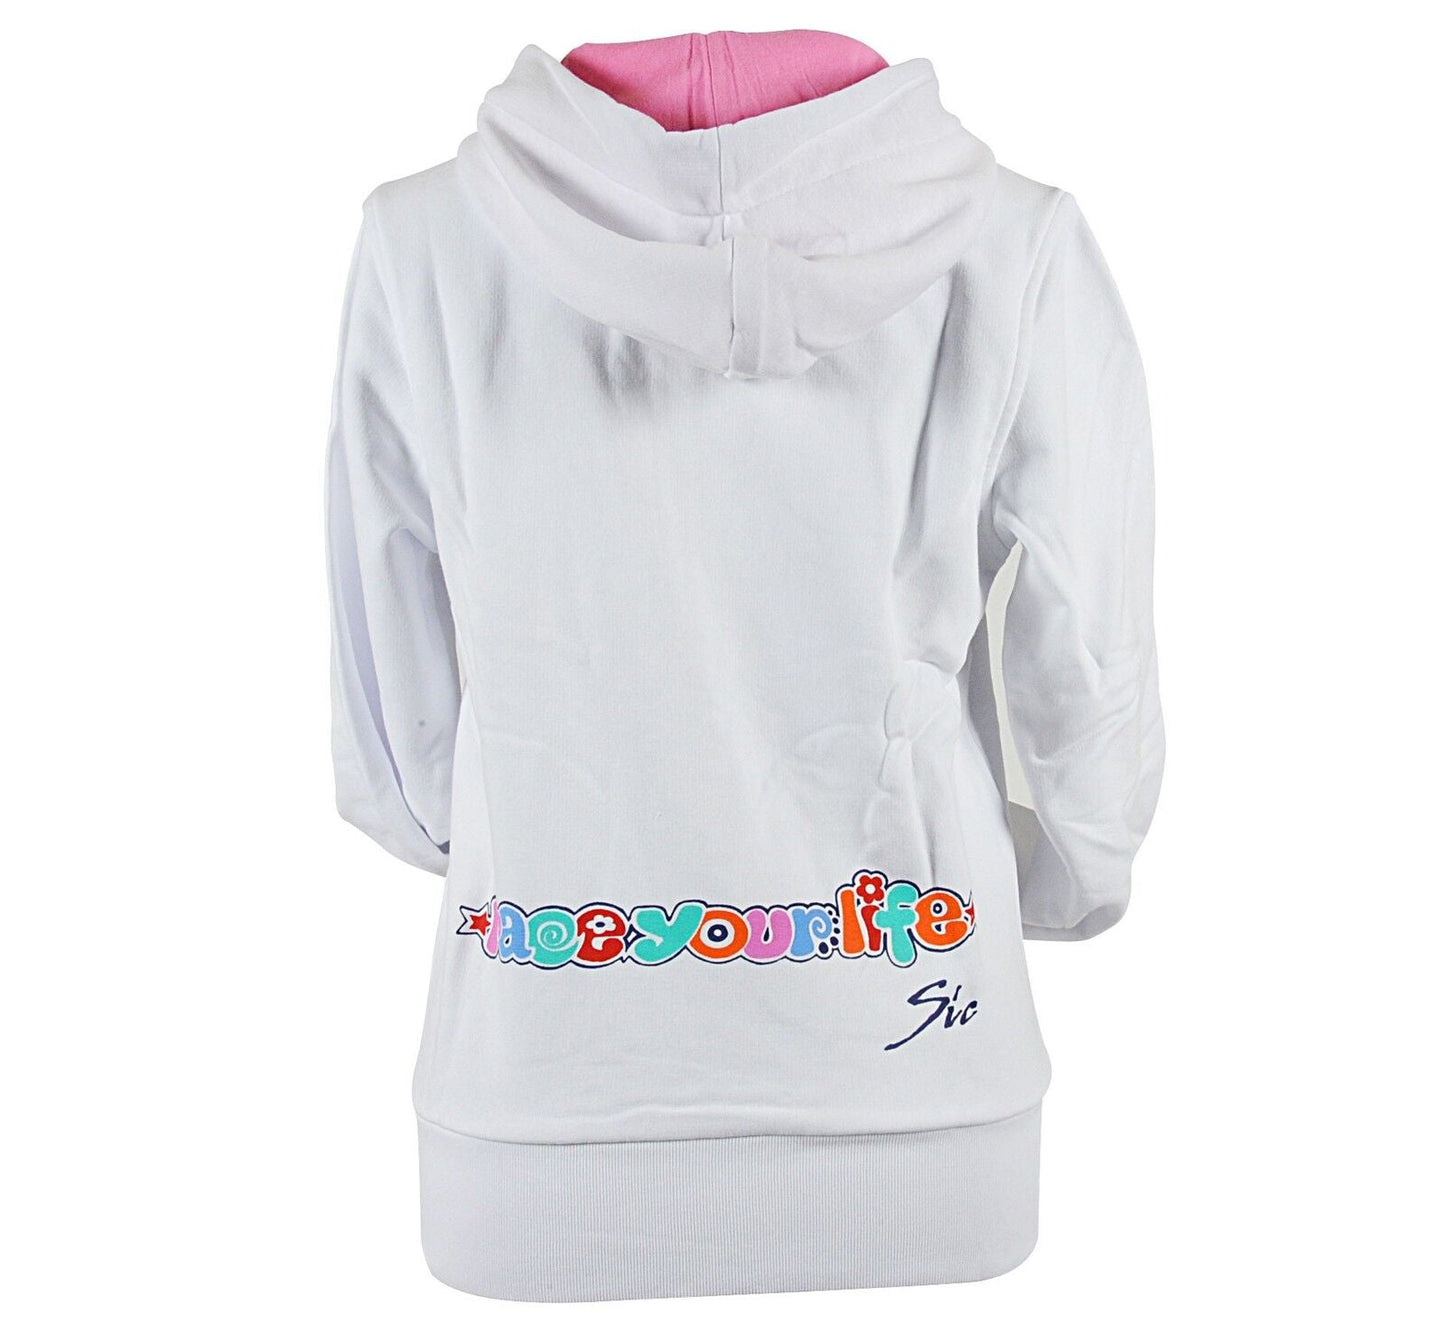 Official Supersic 58 Womans White Hoodie Fleece - 13 25006 06